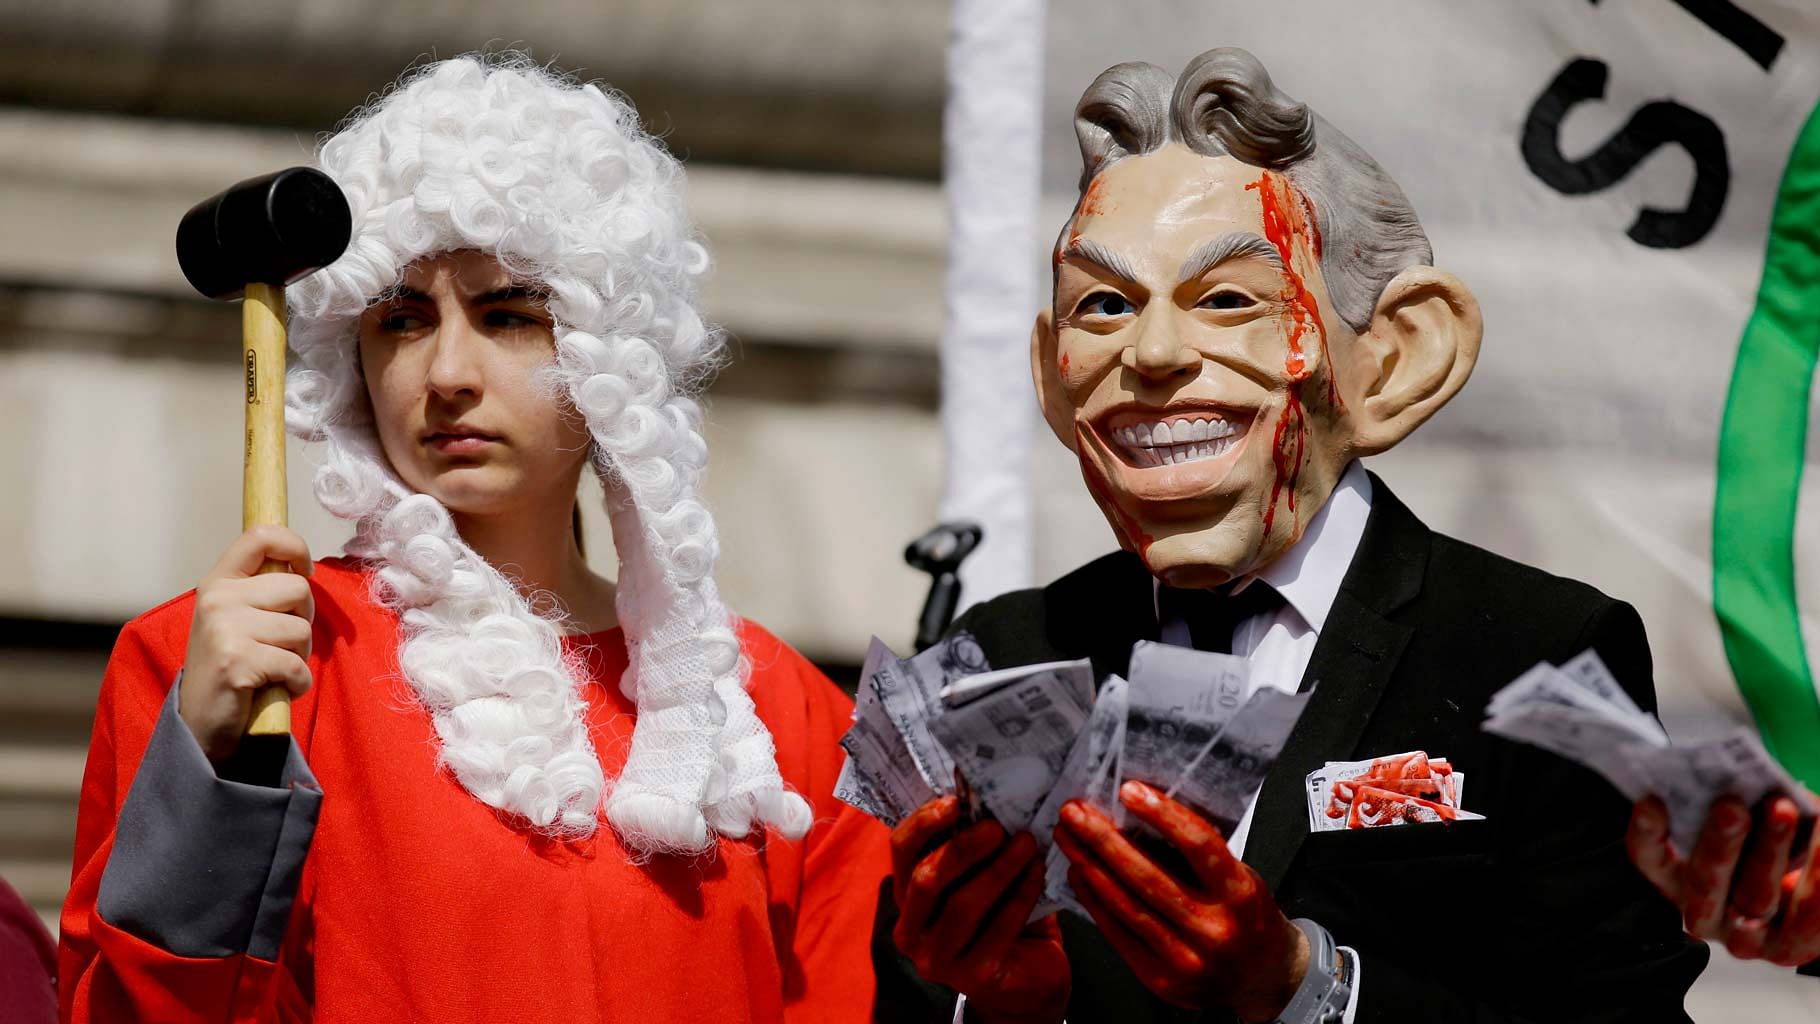 A protester wearing a former British Prime Minister Tony Blair mask (right) and another dressed as a judge in London on Wednesday, 6 July 2016. (Photo: AP)